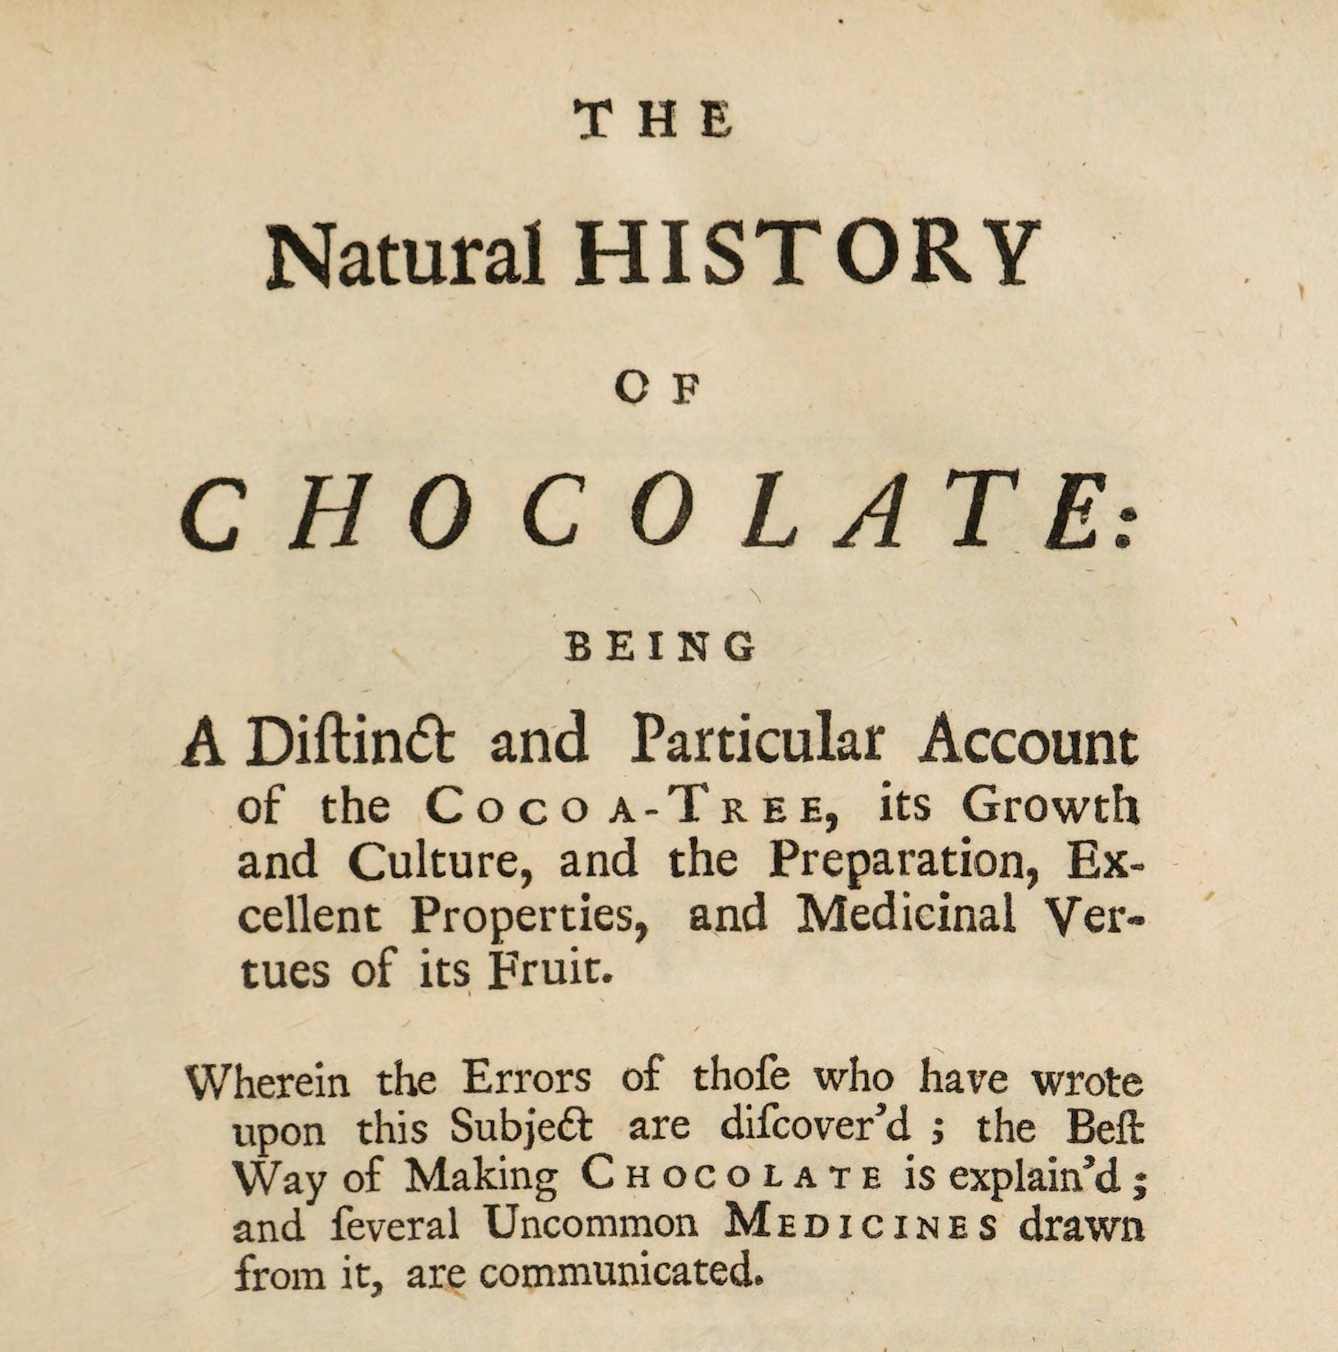 Title page from 'The Natural History of Chocolate'.